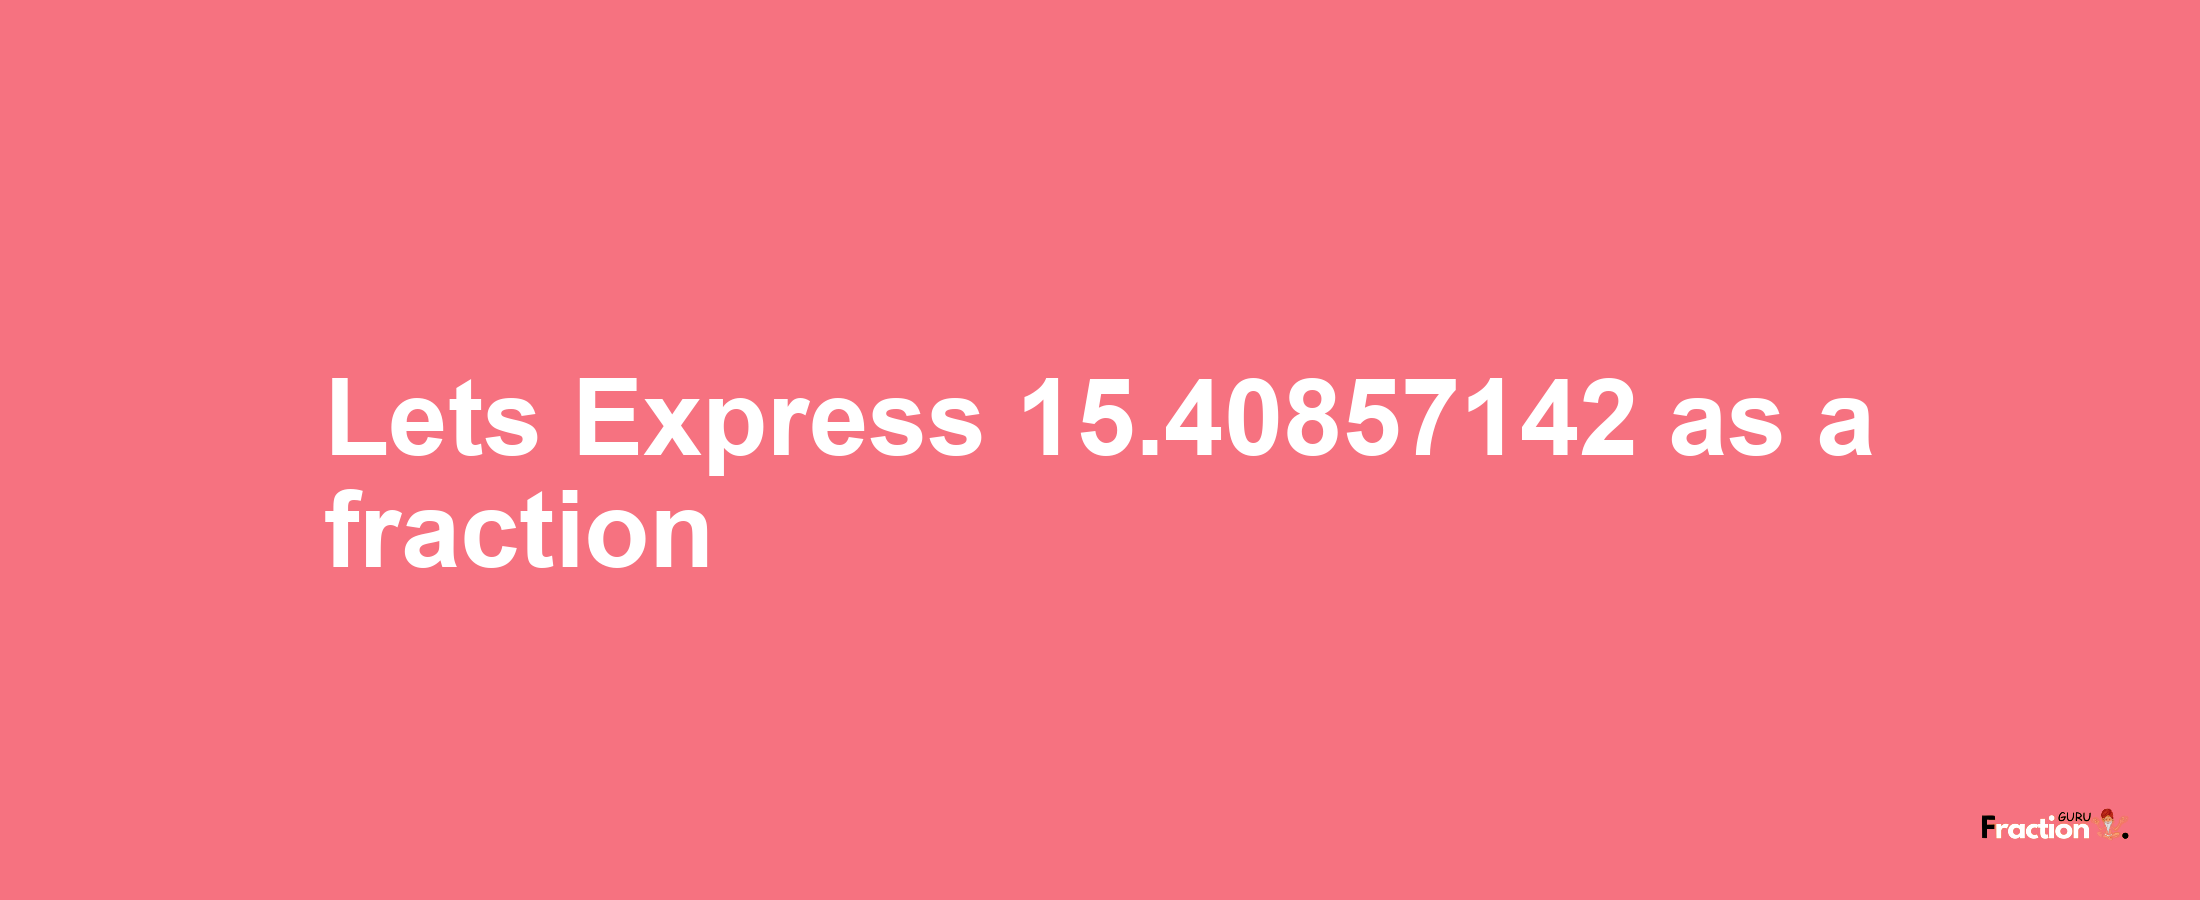 Lets Express 15.40857142 as afraction